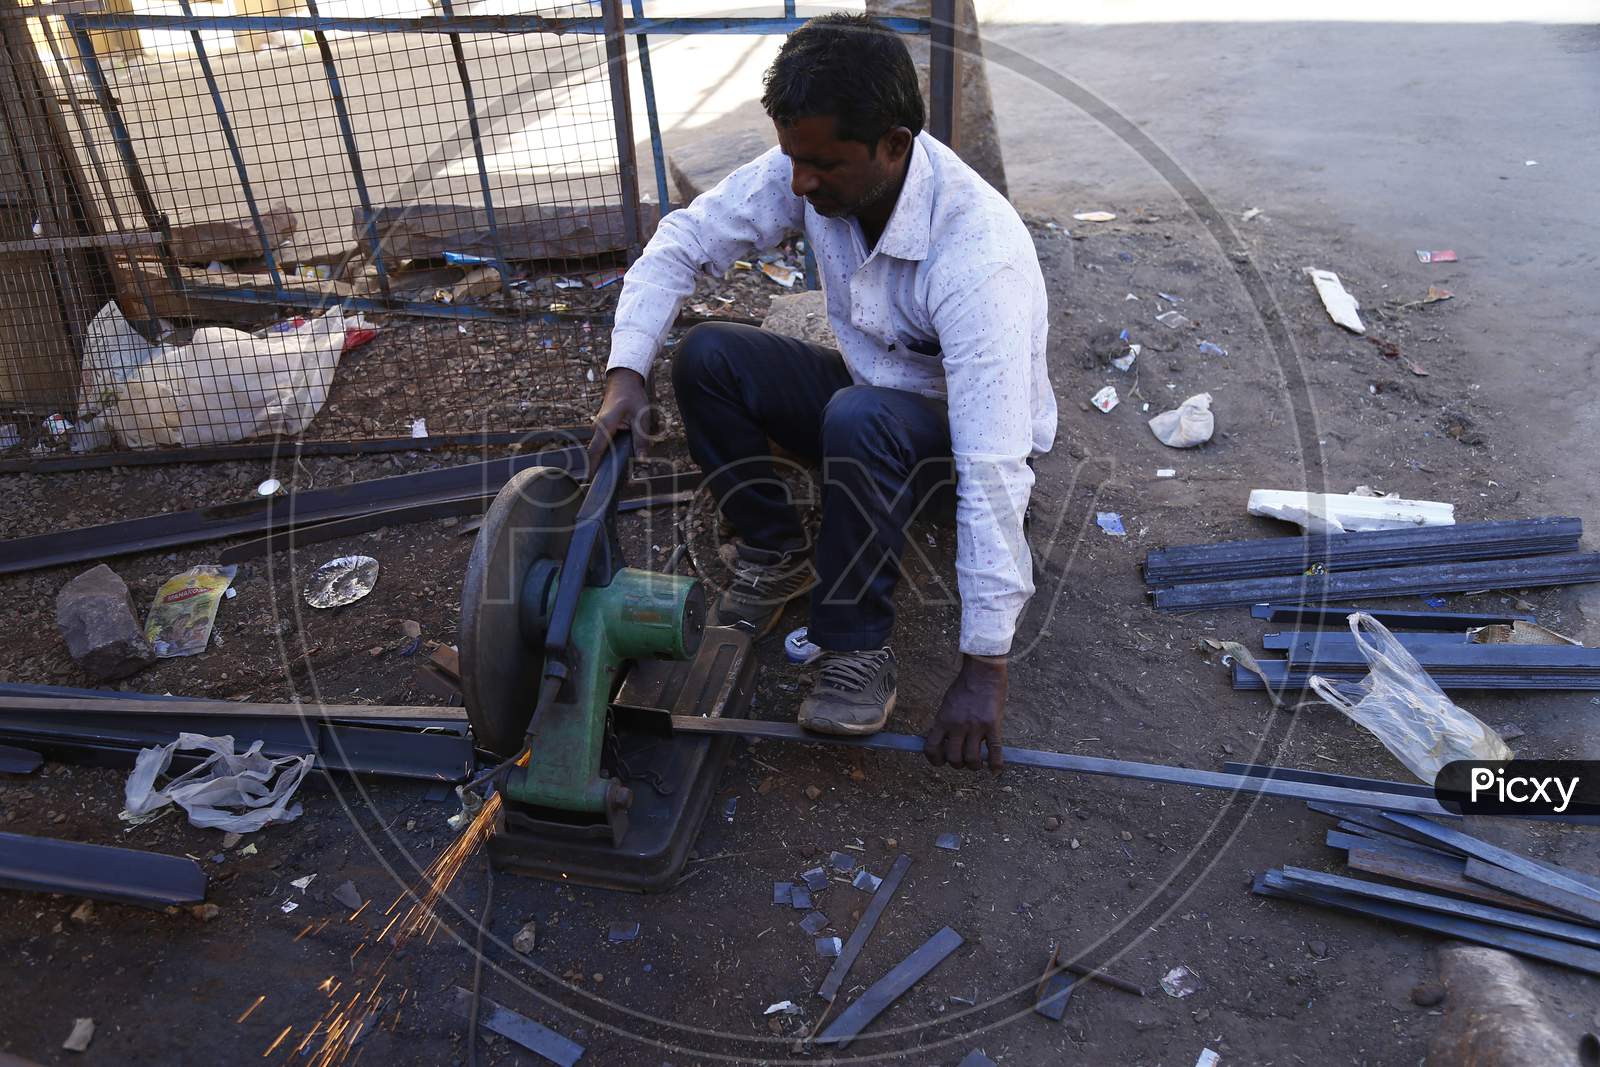 A Worker Cutting Iron Bars With a Machine in Jaisalmer ,Rajasthan, India